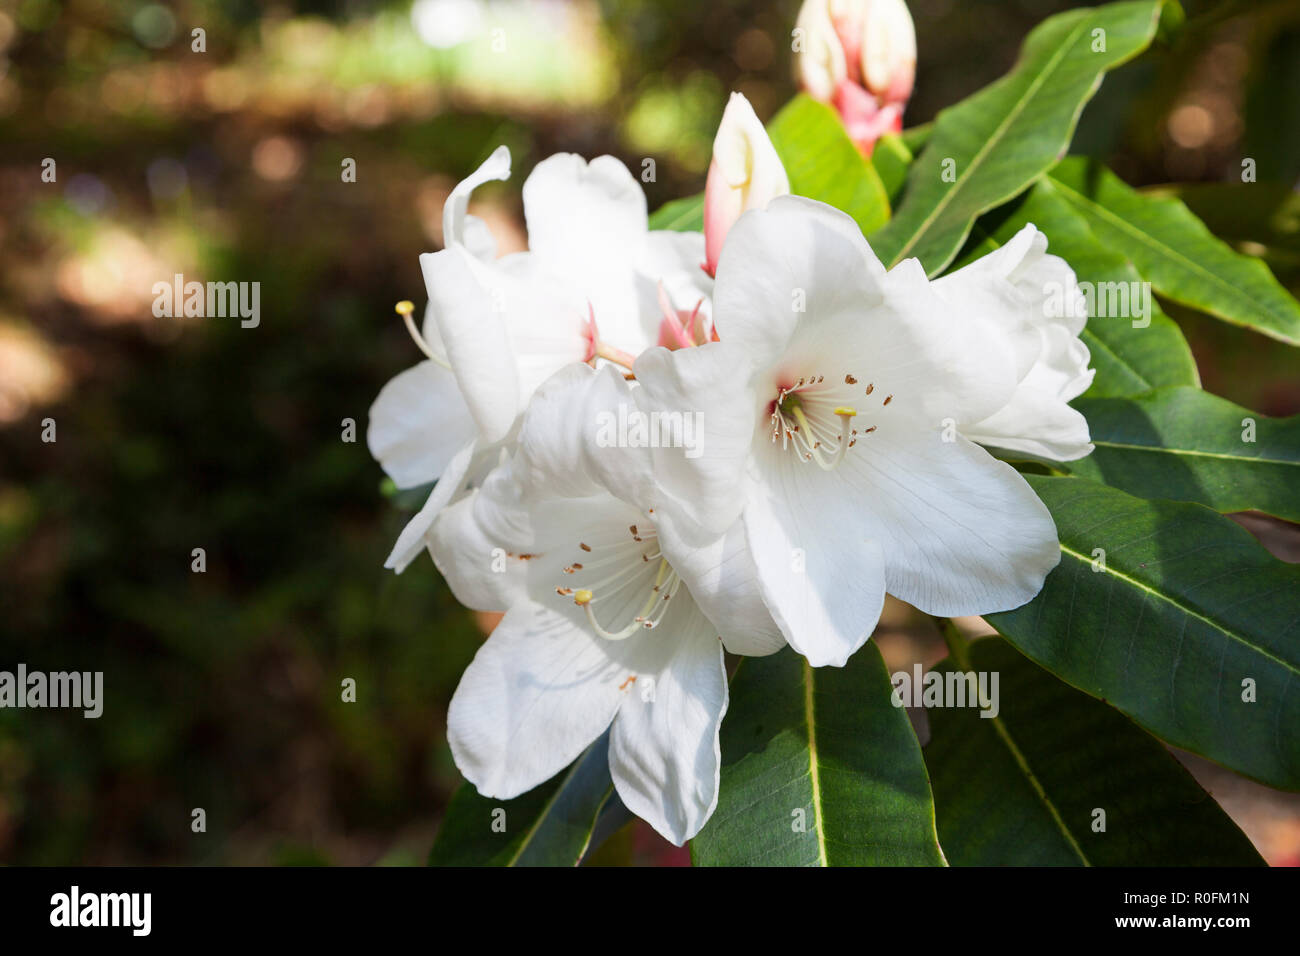 Rhododendron variety Griffithianum with white flowers Stock Photo